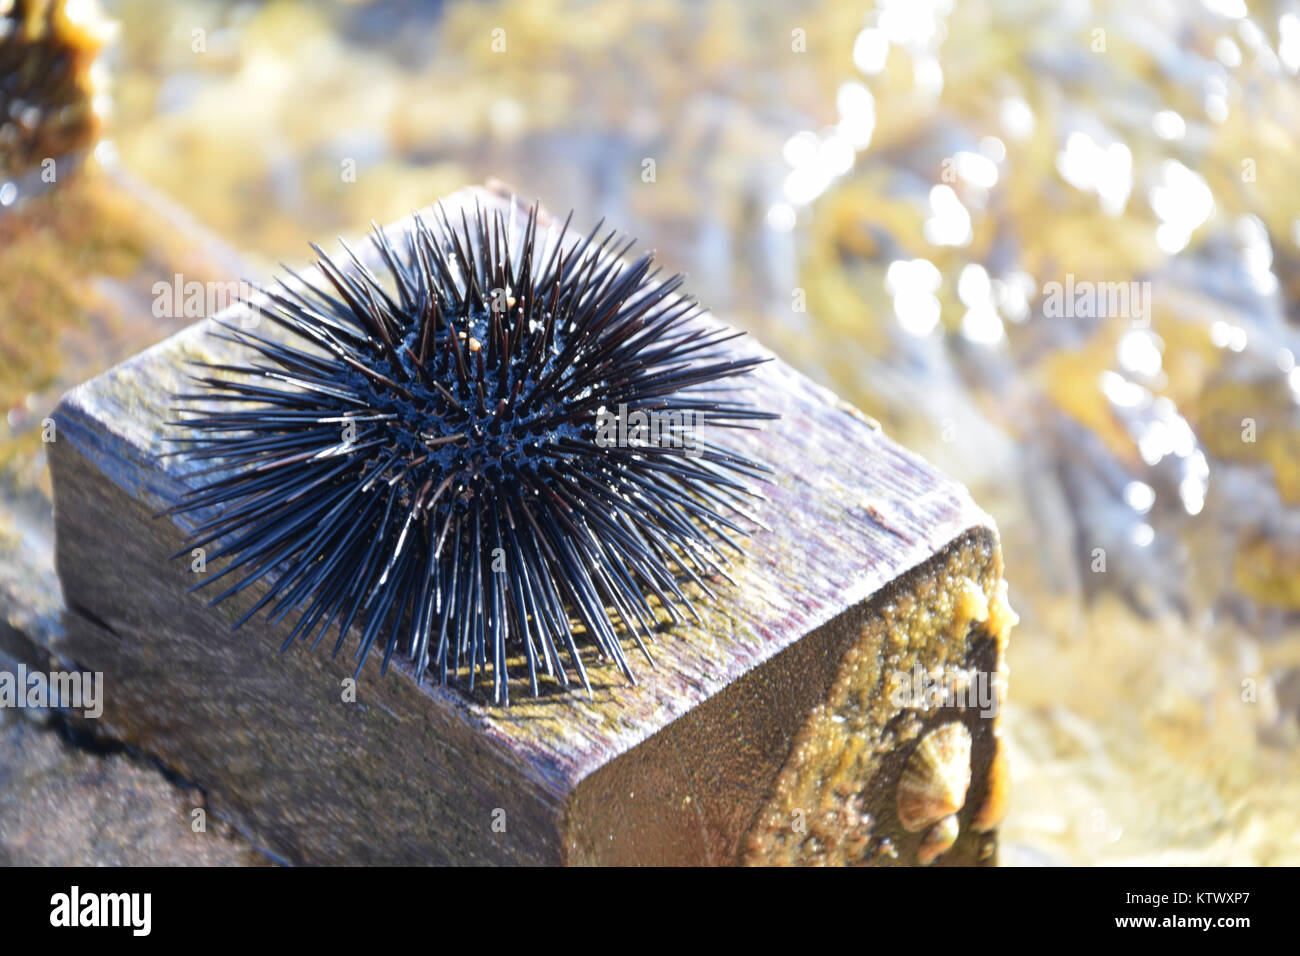 A sea urchin on a piece of wood. Background of waves Stock Photo